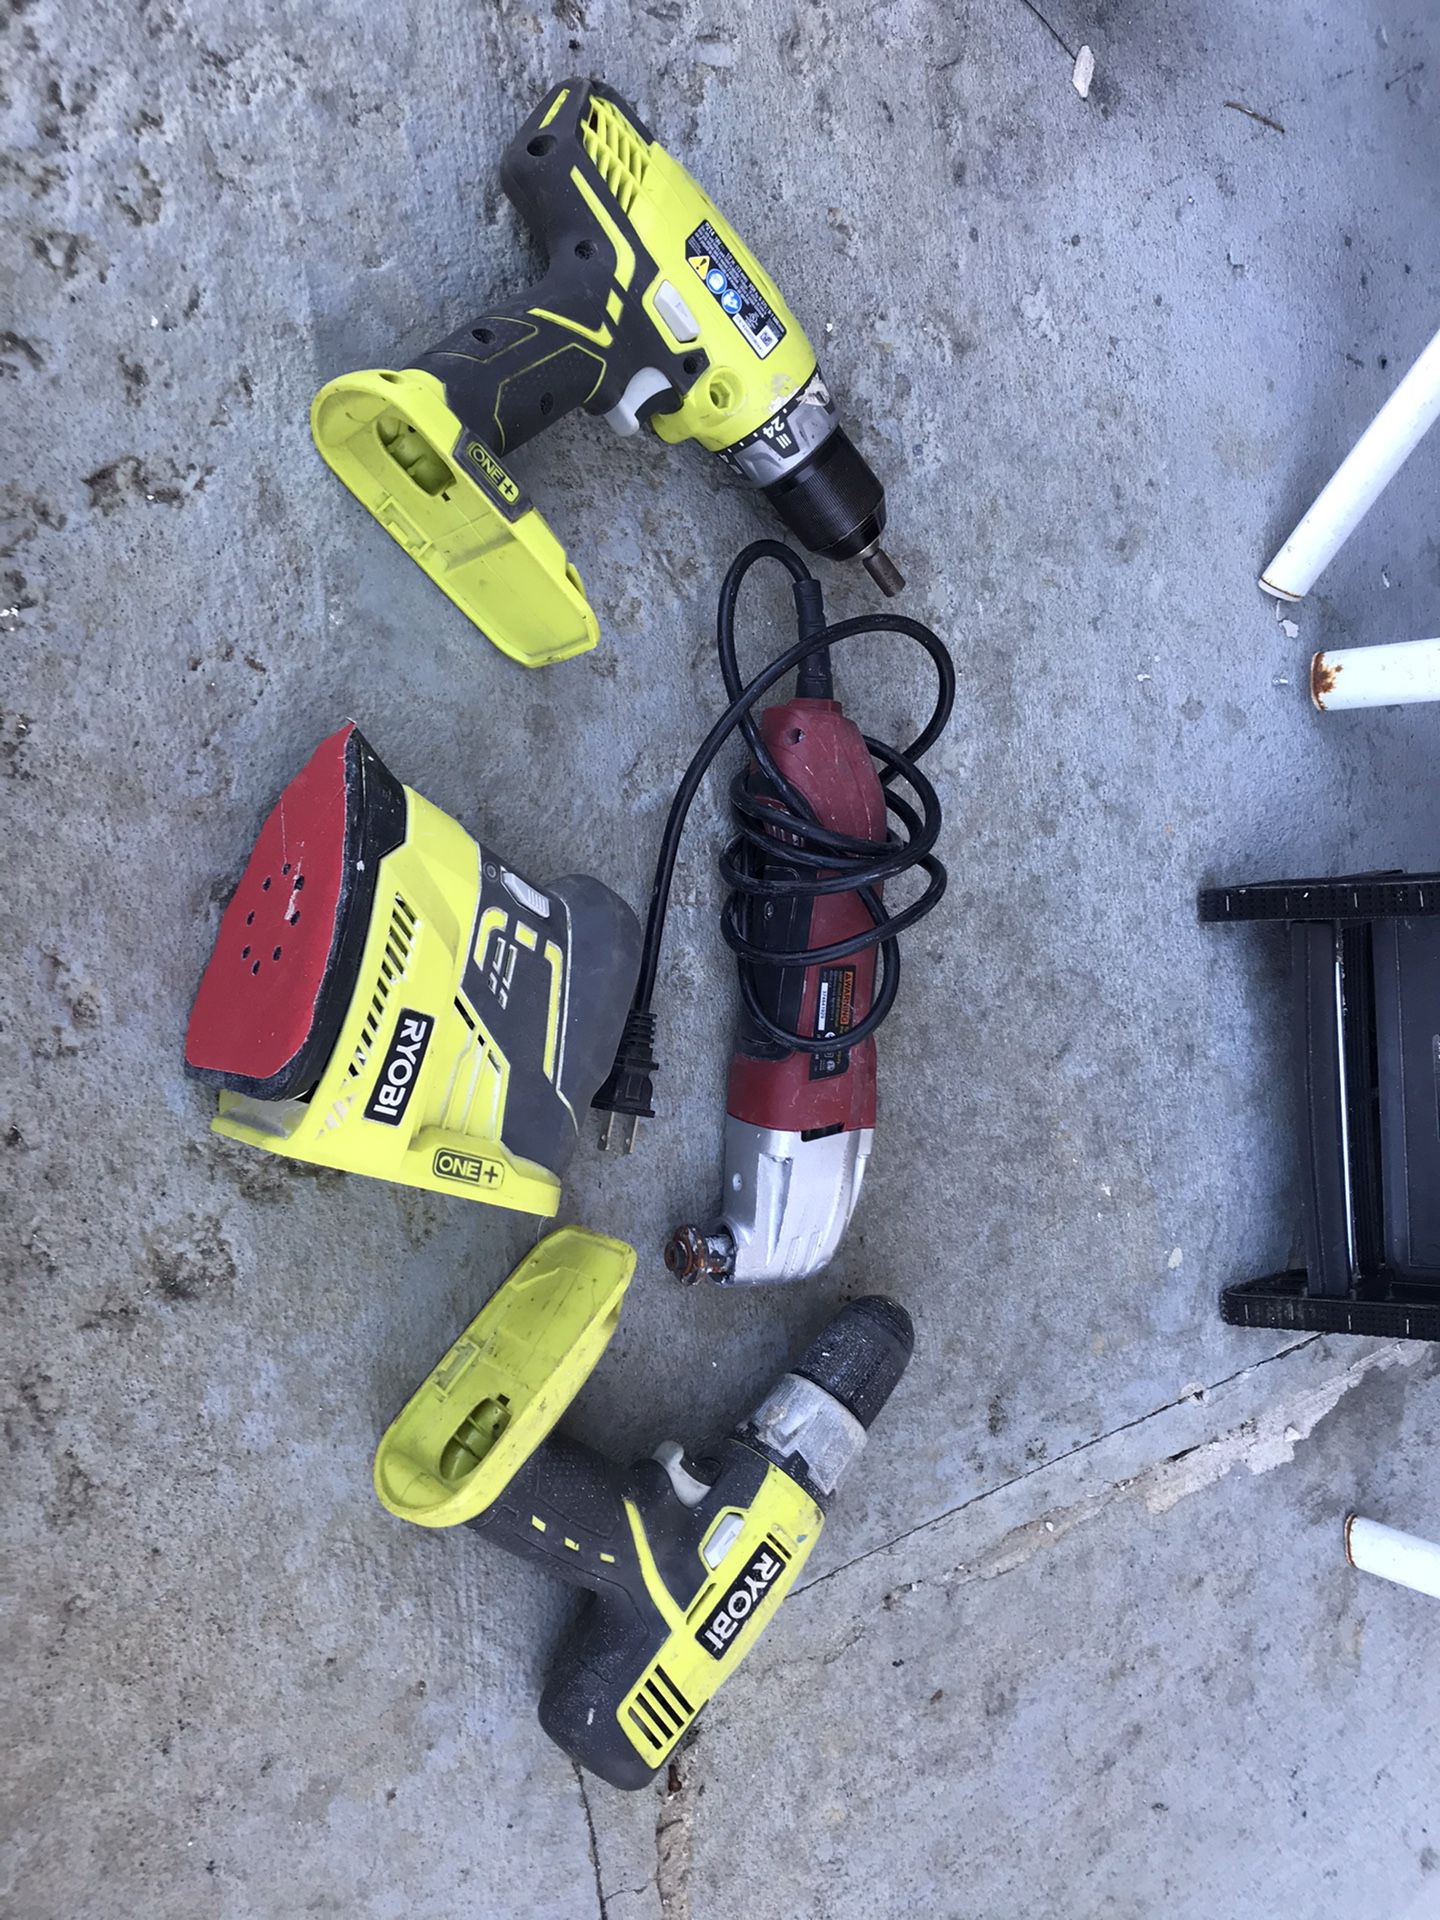 2 ryobi drills and sander with Chicago electric multi tool.